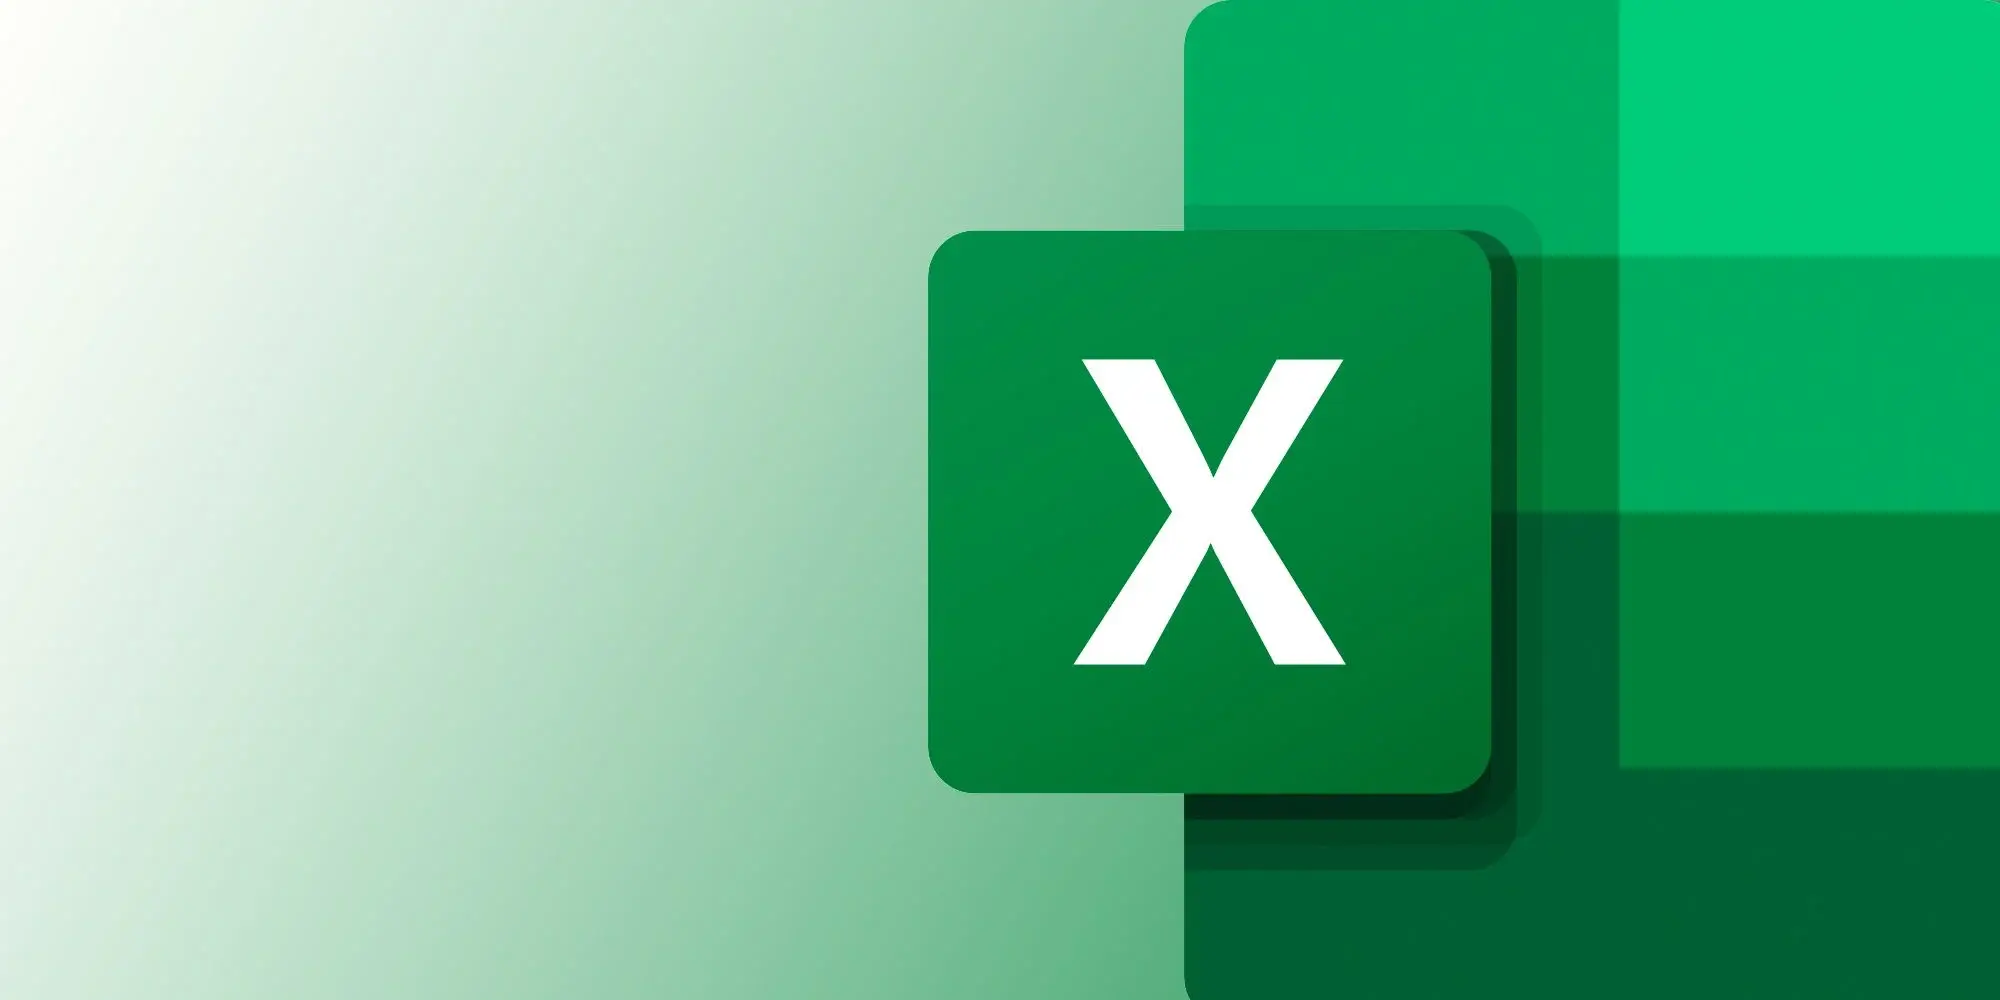 New Exciting Features Arrive on Microsoft Excel 